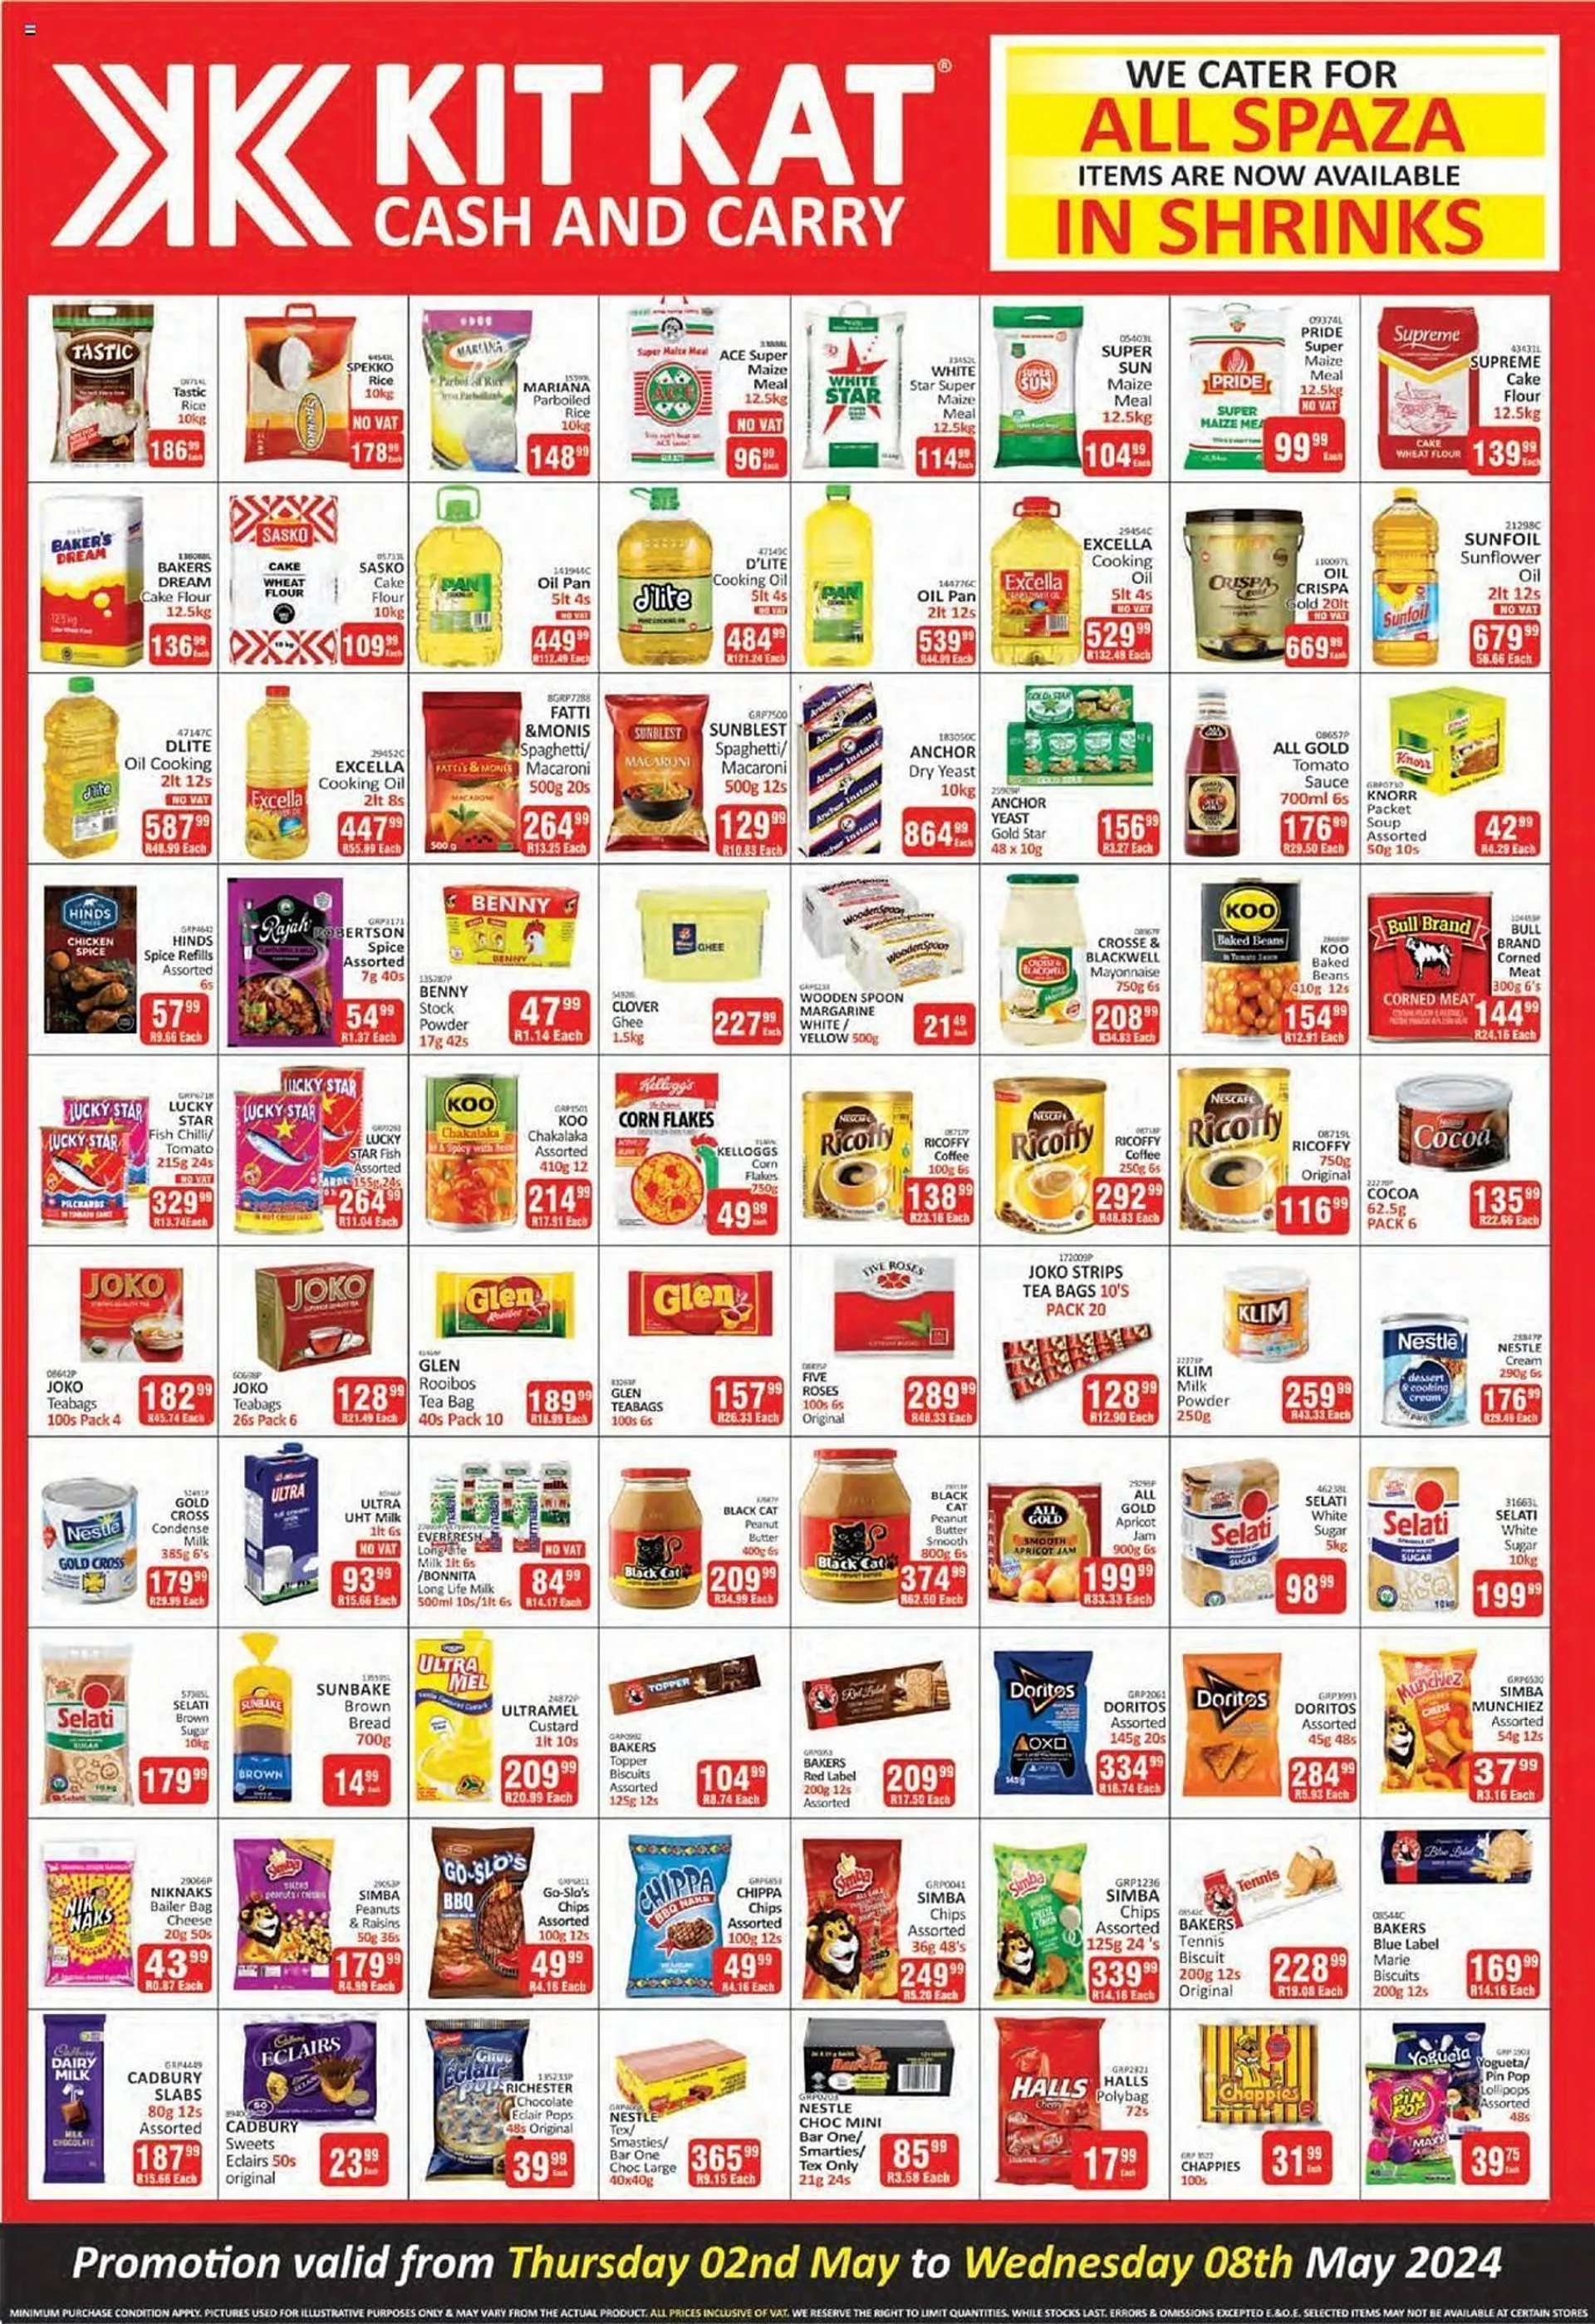 KitKat Cash and Carry catalogue - 1